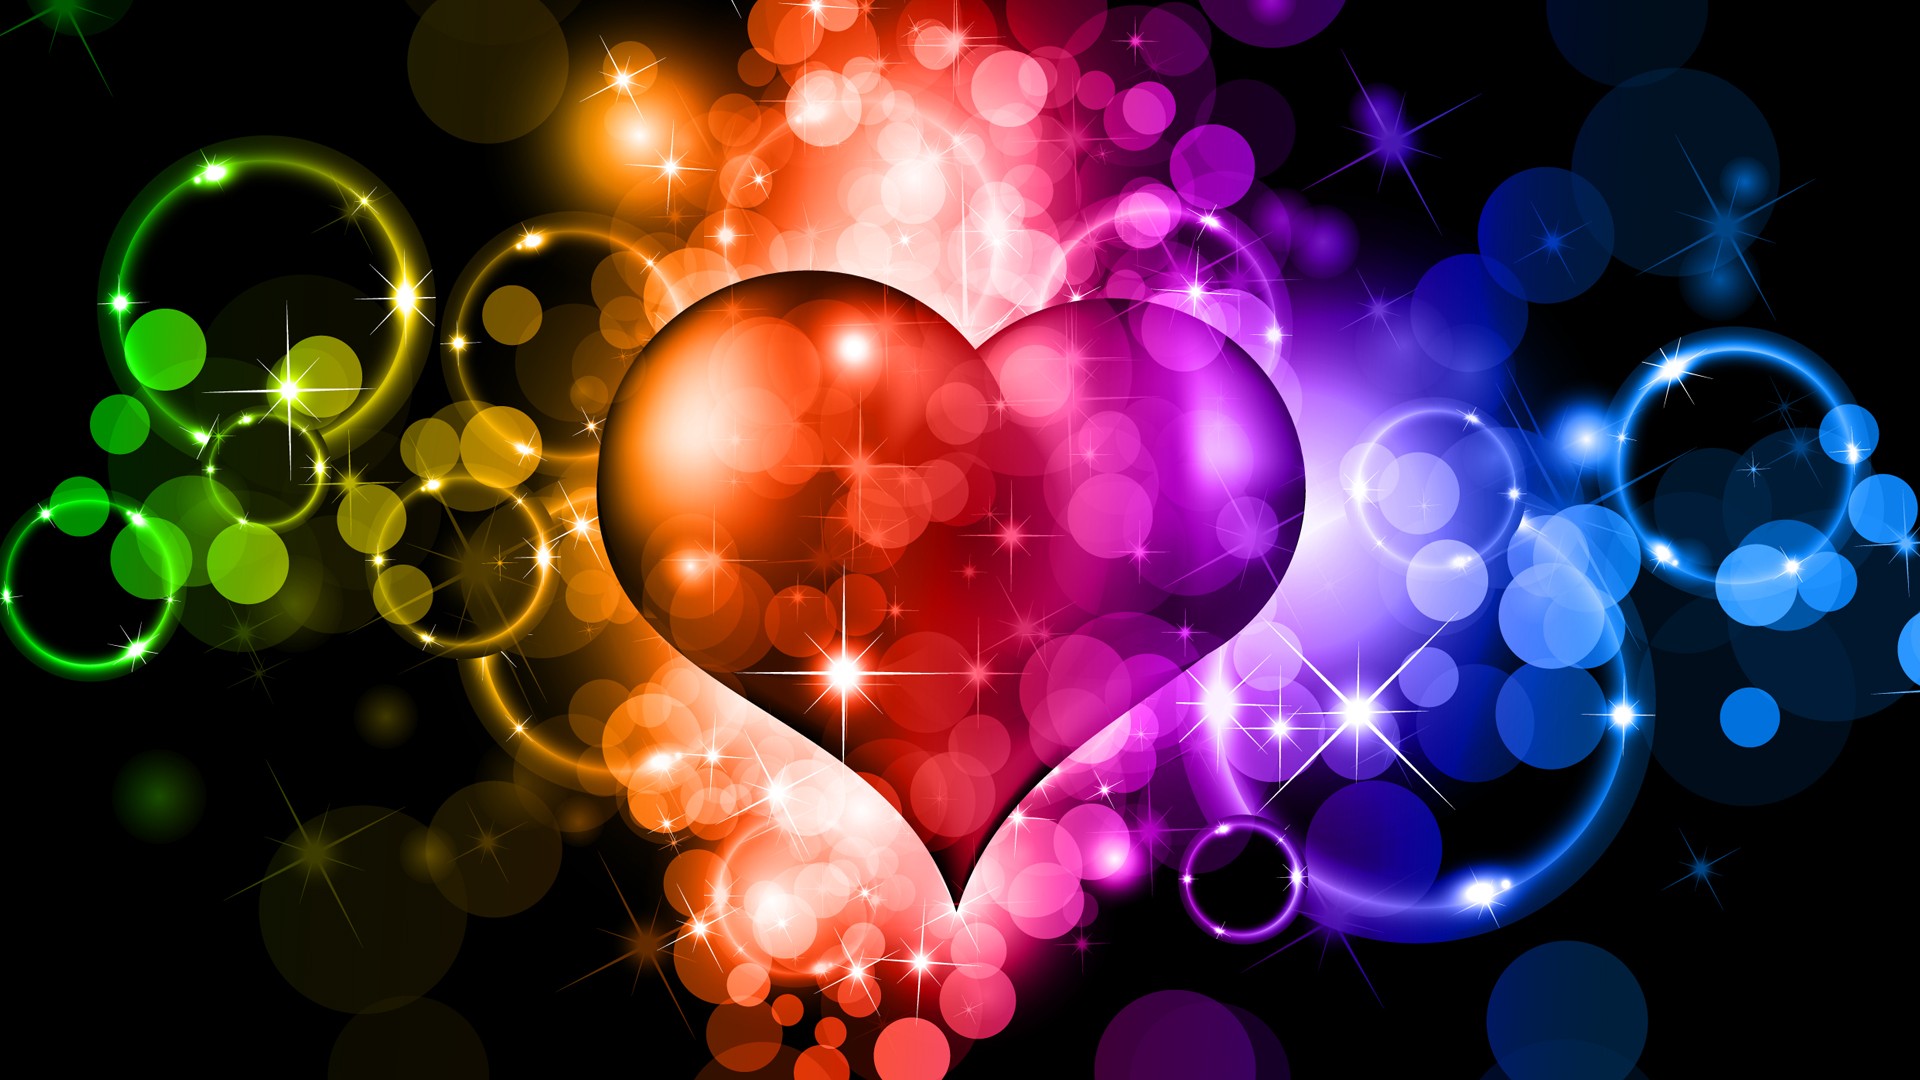 heart, Heart shaped, Colorful, Graphic design Wallpapers HD / Desktop and Mobile Backgrounds